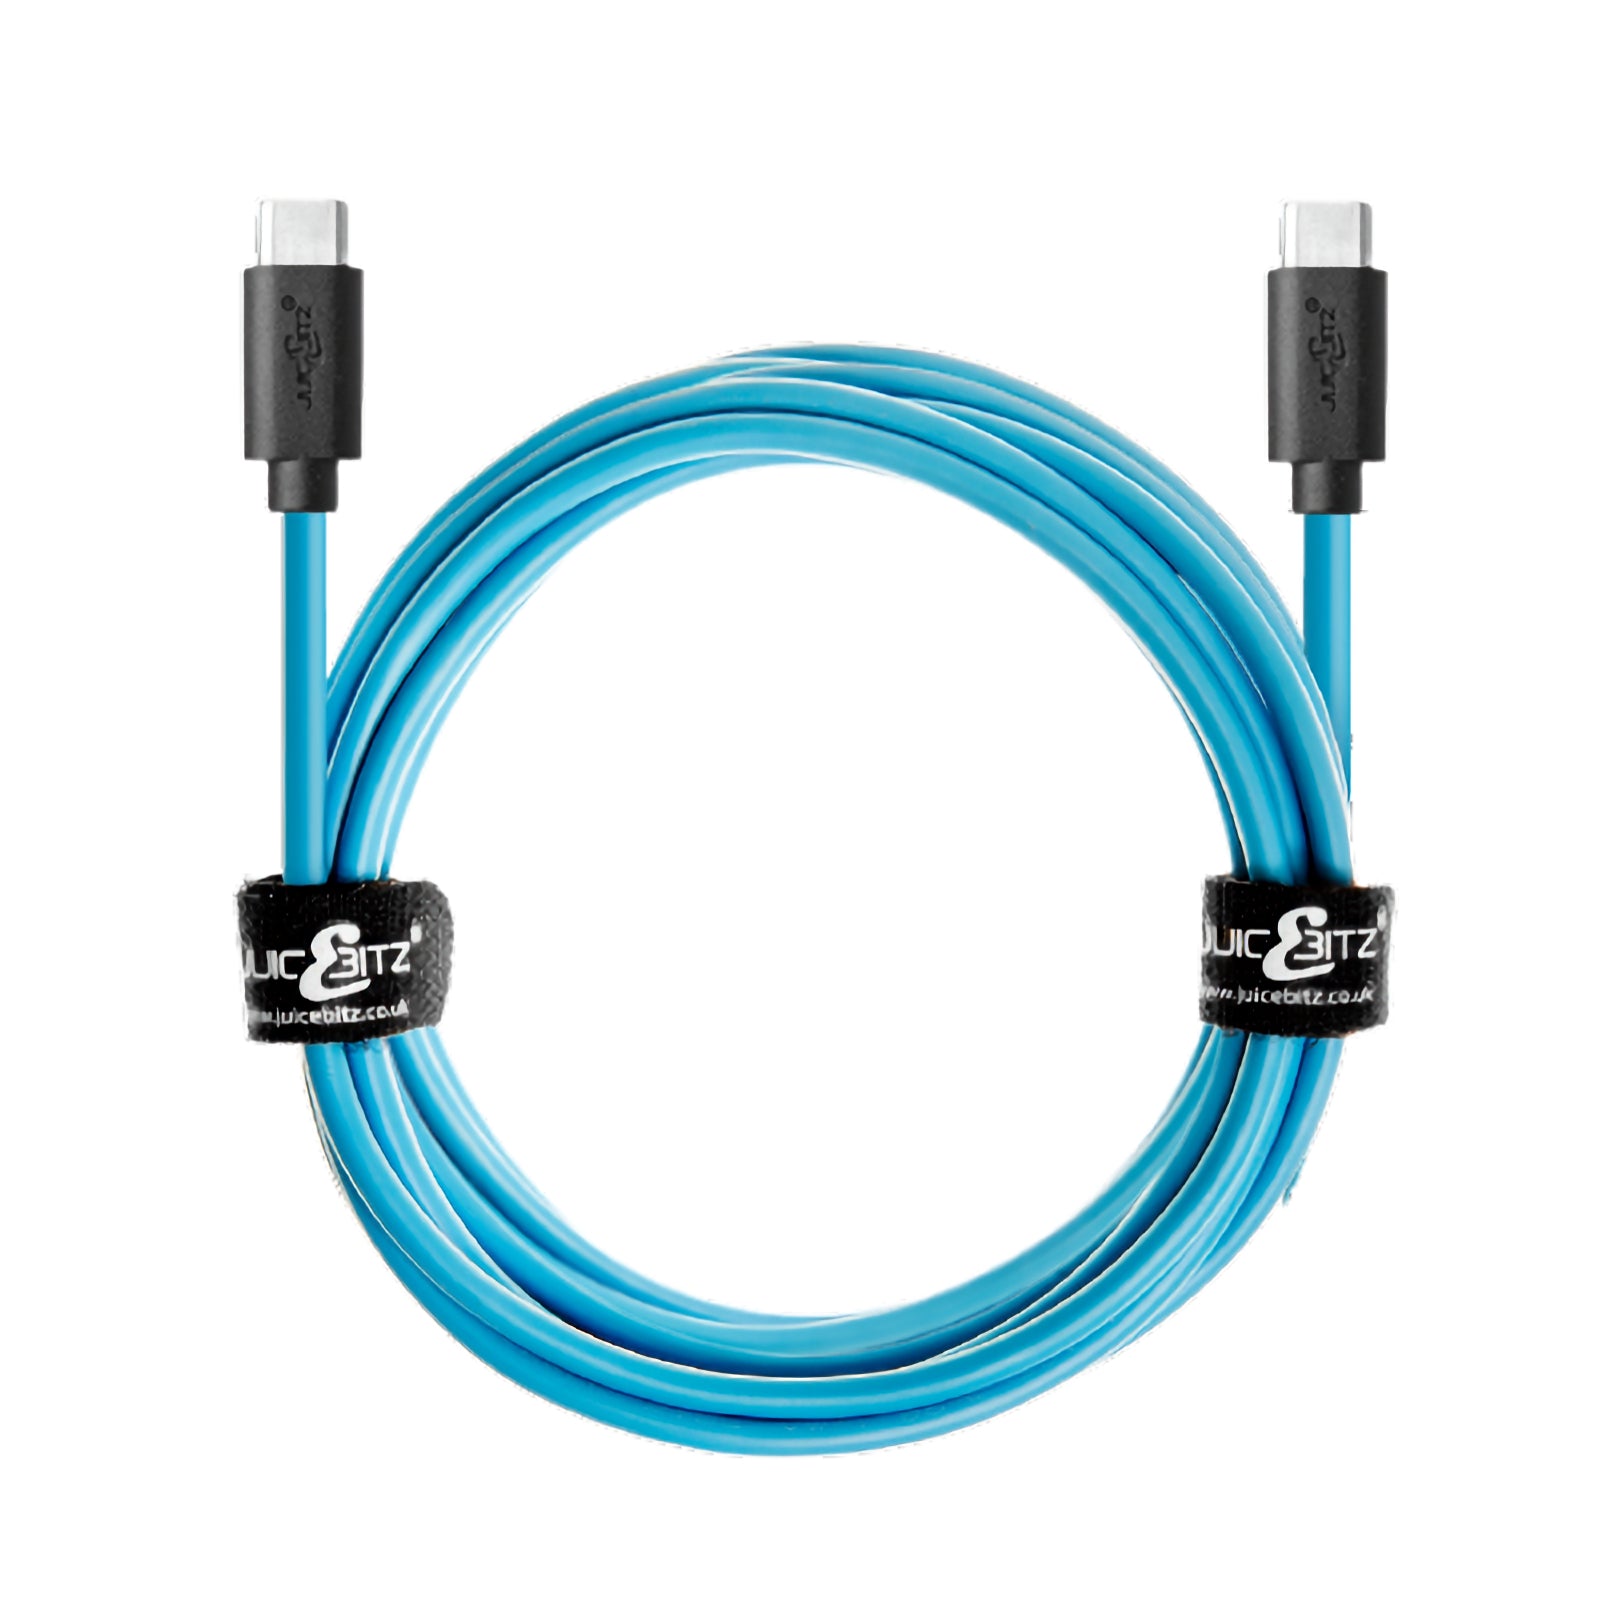 USB-C to USB-C 3A Charger Cable USB 2.0 Data Transfer Lead - Blue